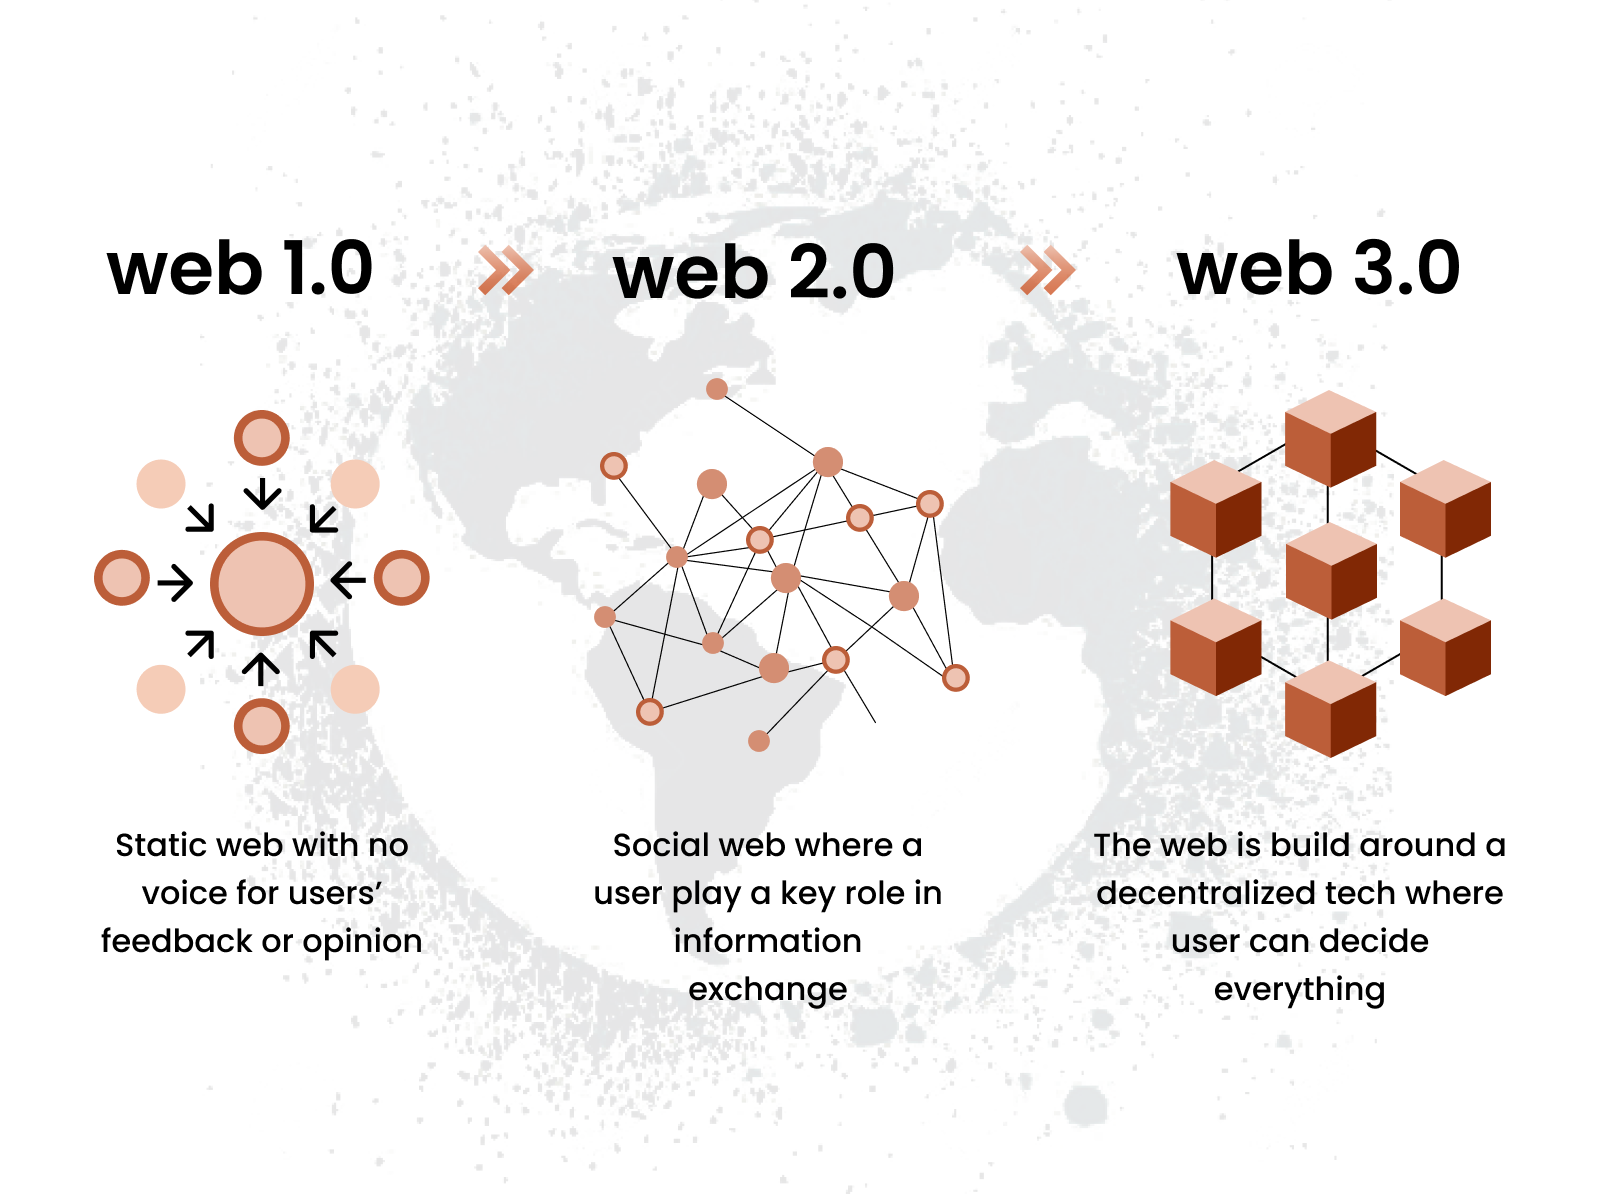 Evolution of Web (1.0 to 2.0 to 3.0)